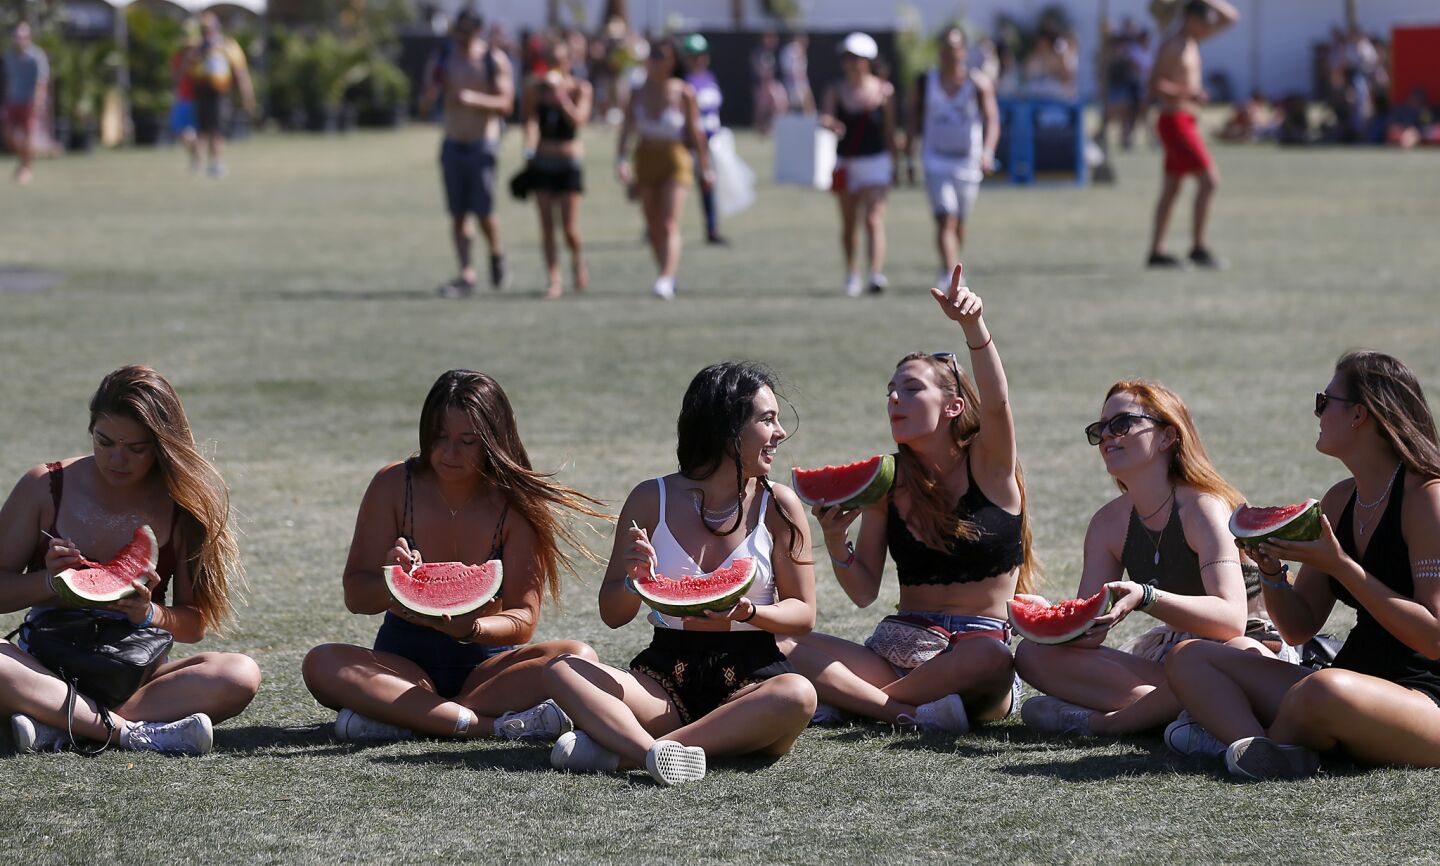 A group of girls keeps cool with wedges of watermelon as they watch a performance by Jamaican reggae artist Chronixx at the Coachella Music and Arts Festival.